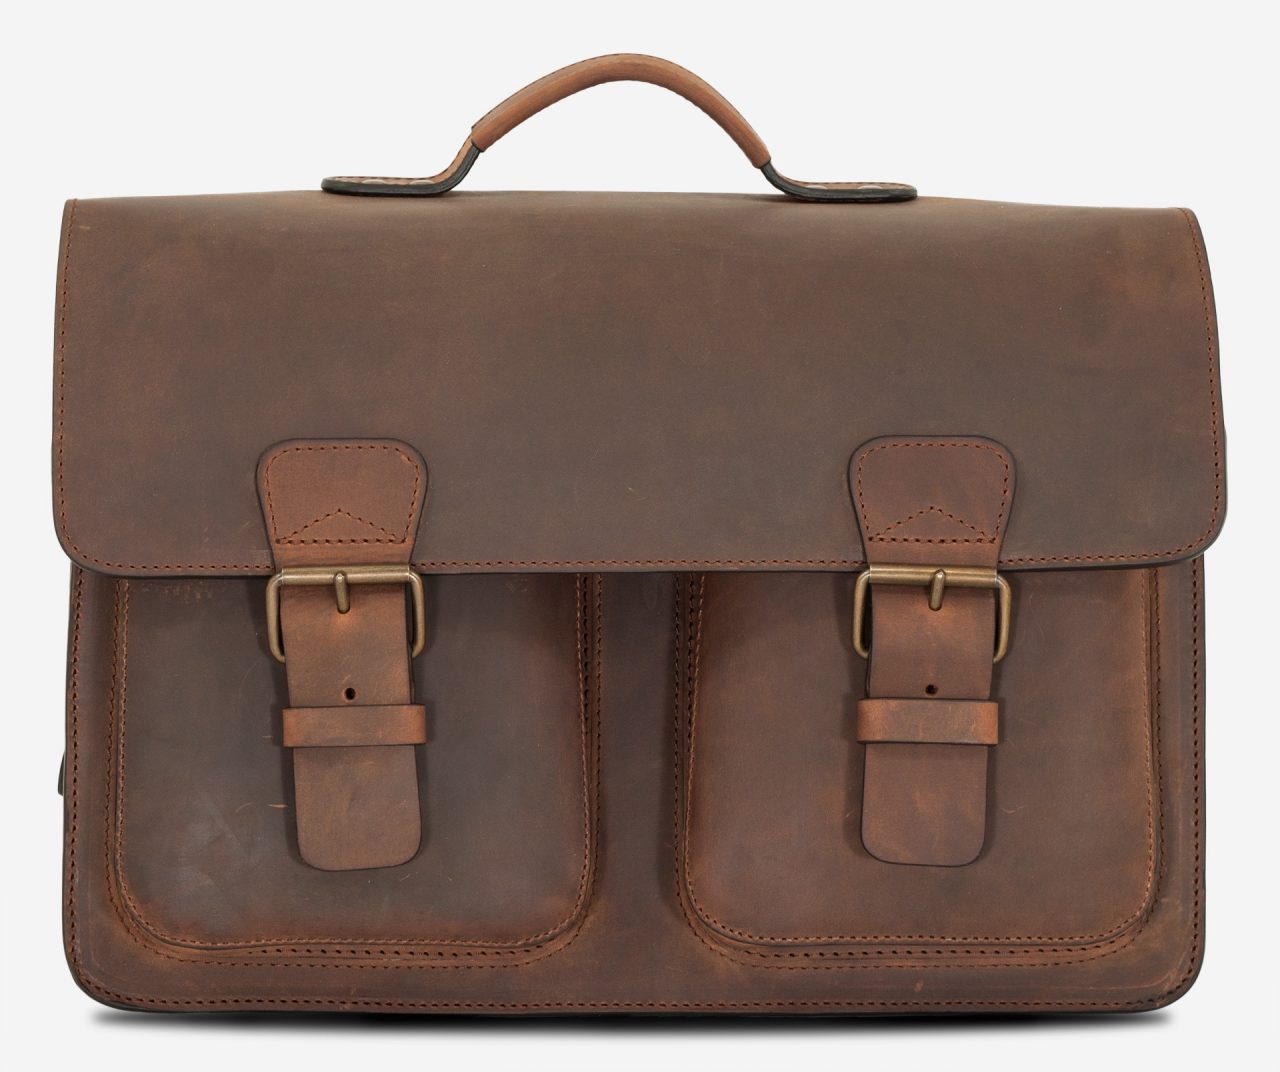 Front view of the Ruitertassen brown leather satchel briefcase with 2 symmetric front pockets.